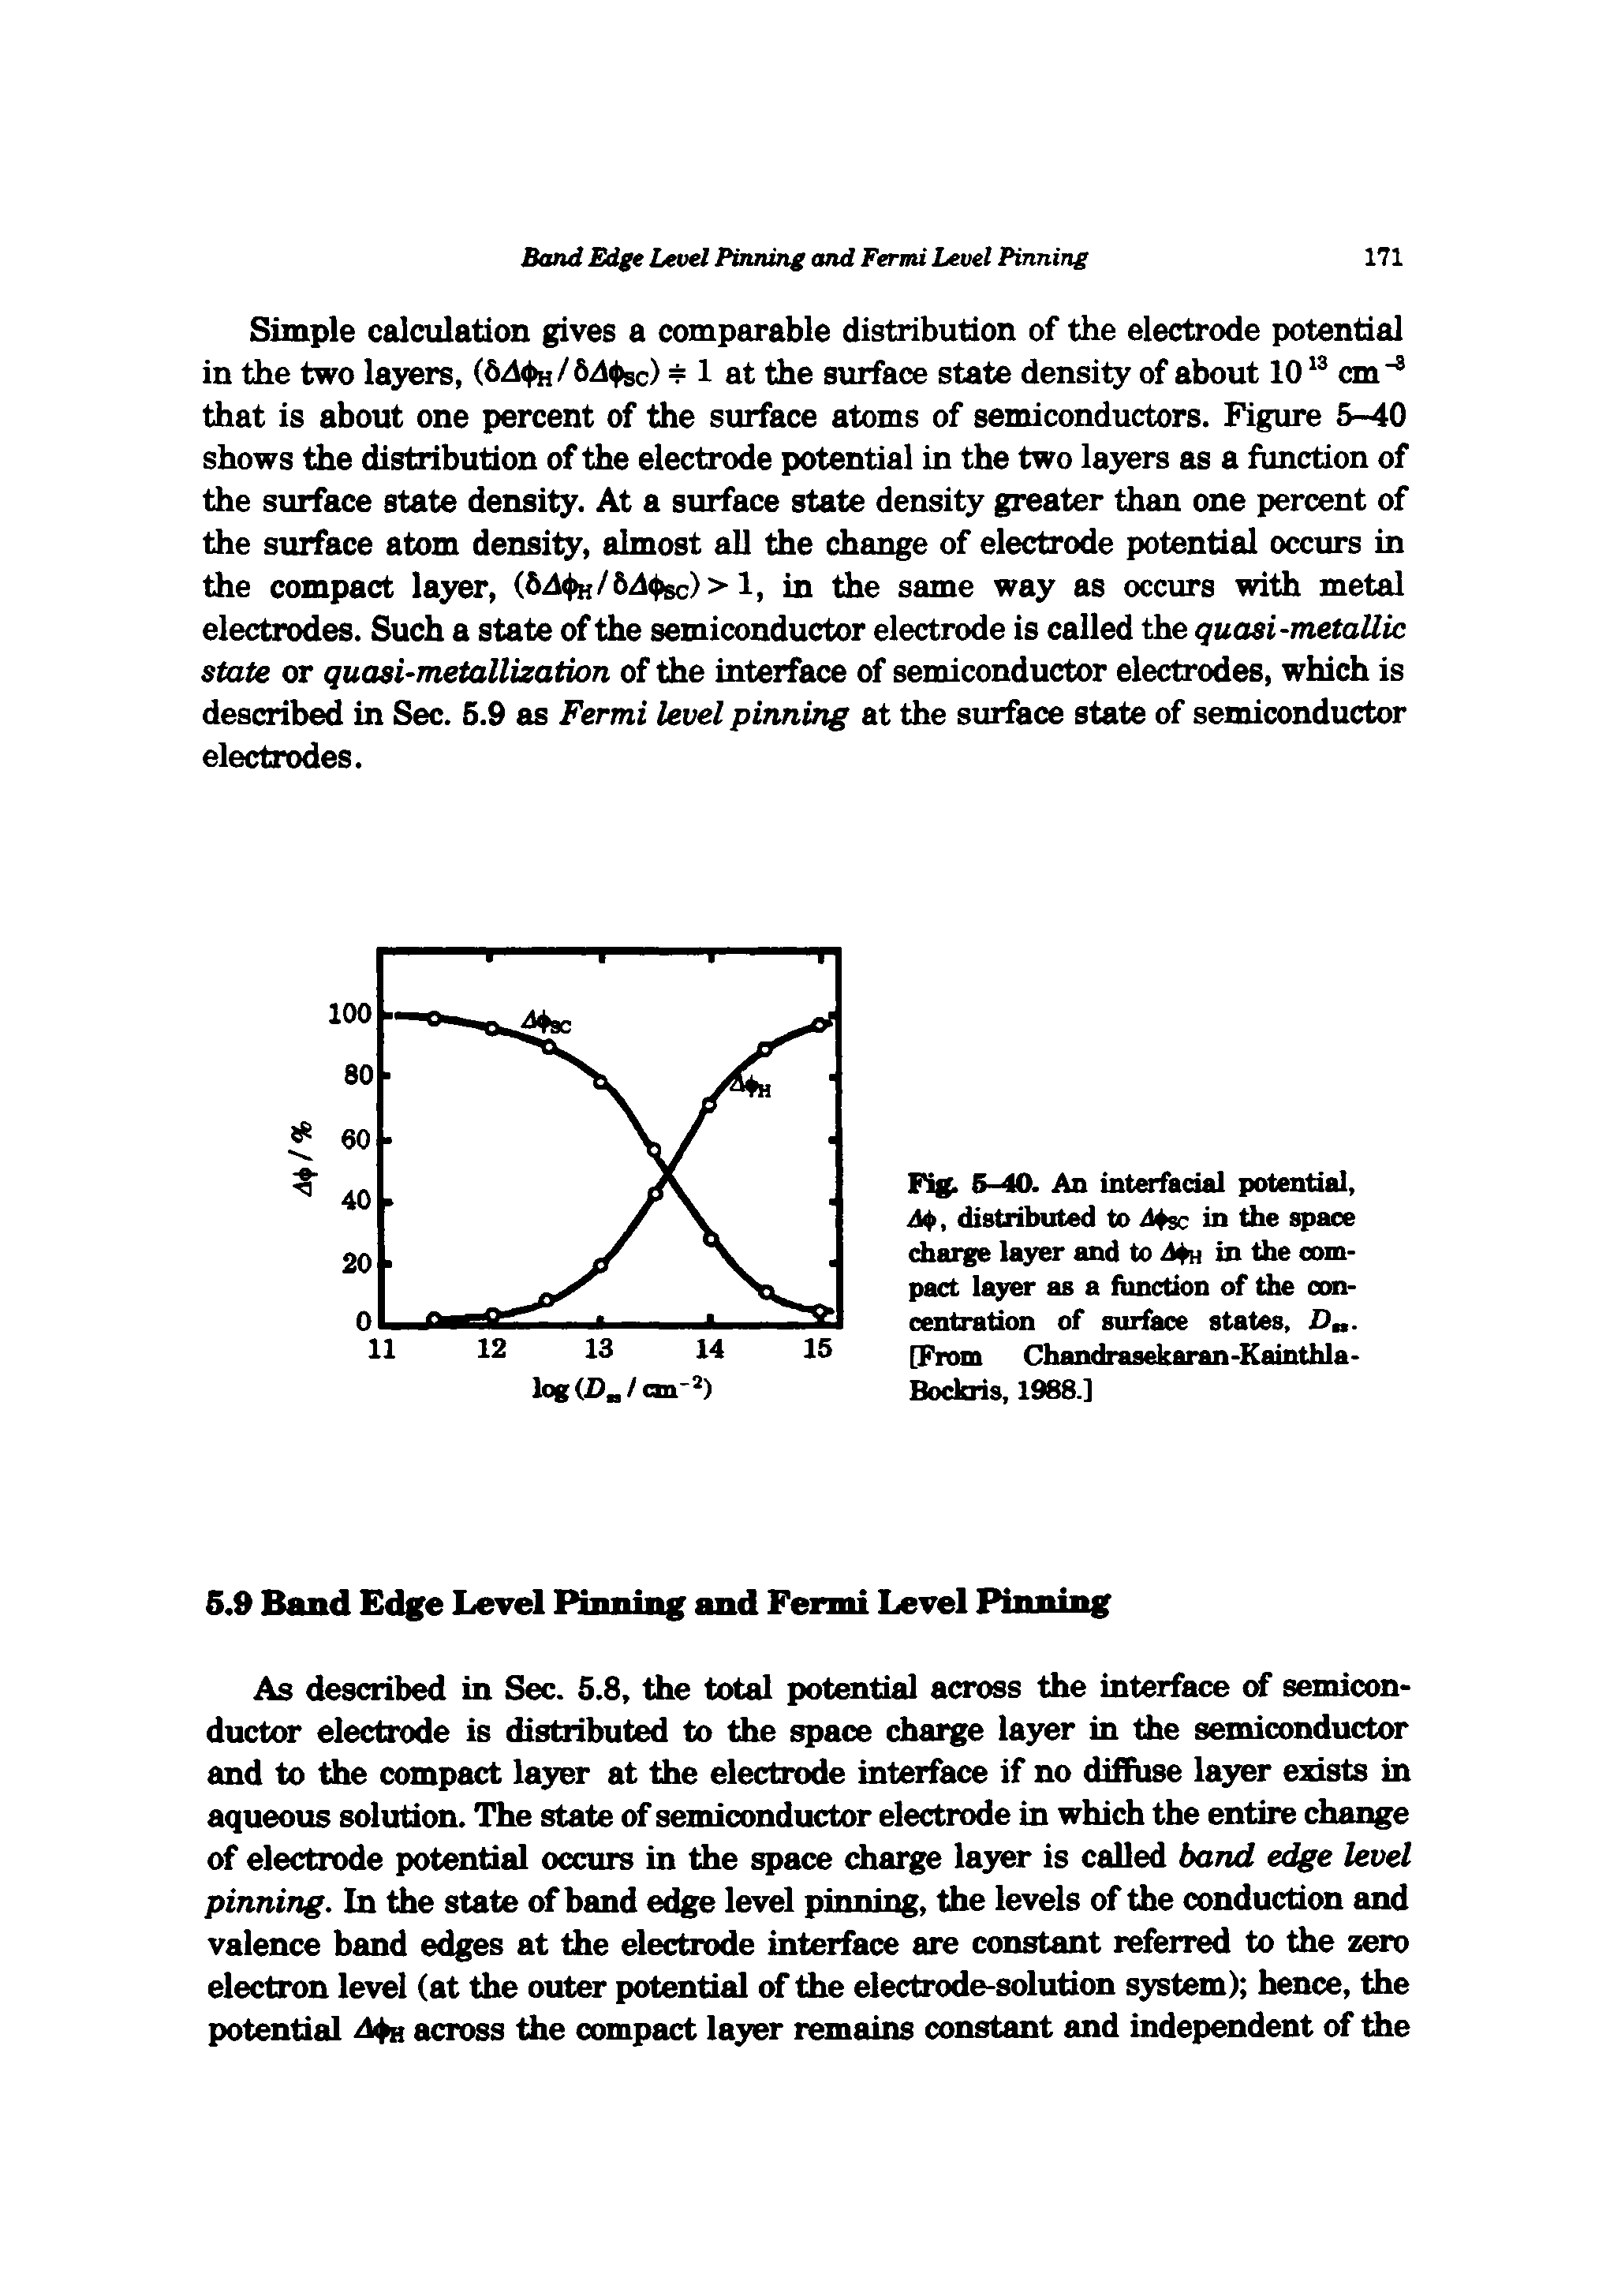 Fig. 6-40. An interfadal potential, distributed to Msc in the space charge layer and to in the compact layer as a function of the concentration of surface states, D . [From Chandrasekaran-Kainthla-Bockris, 1988.]...